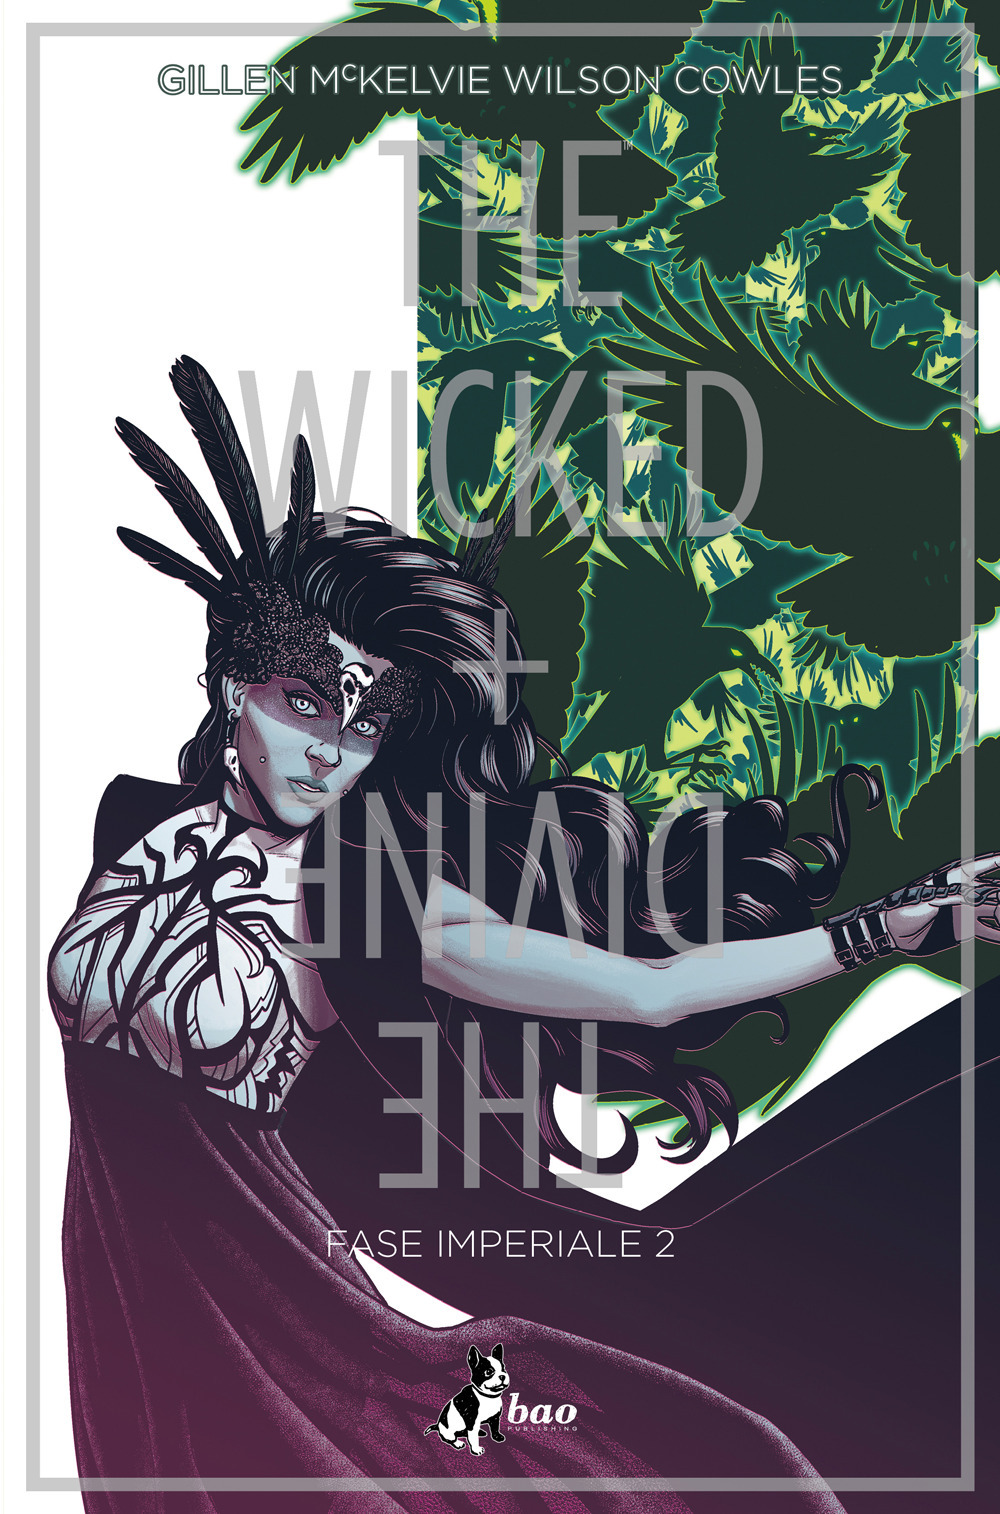 The wicked + the divine. Vol. 6: Fase imperiale 2